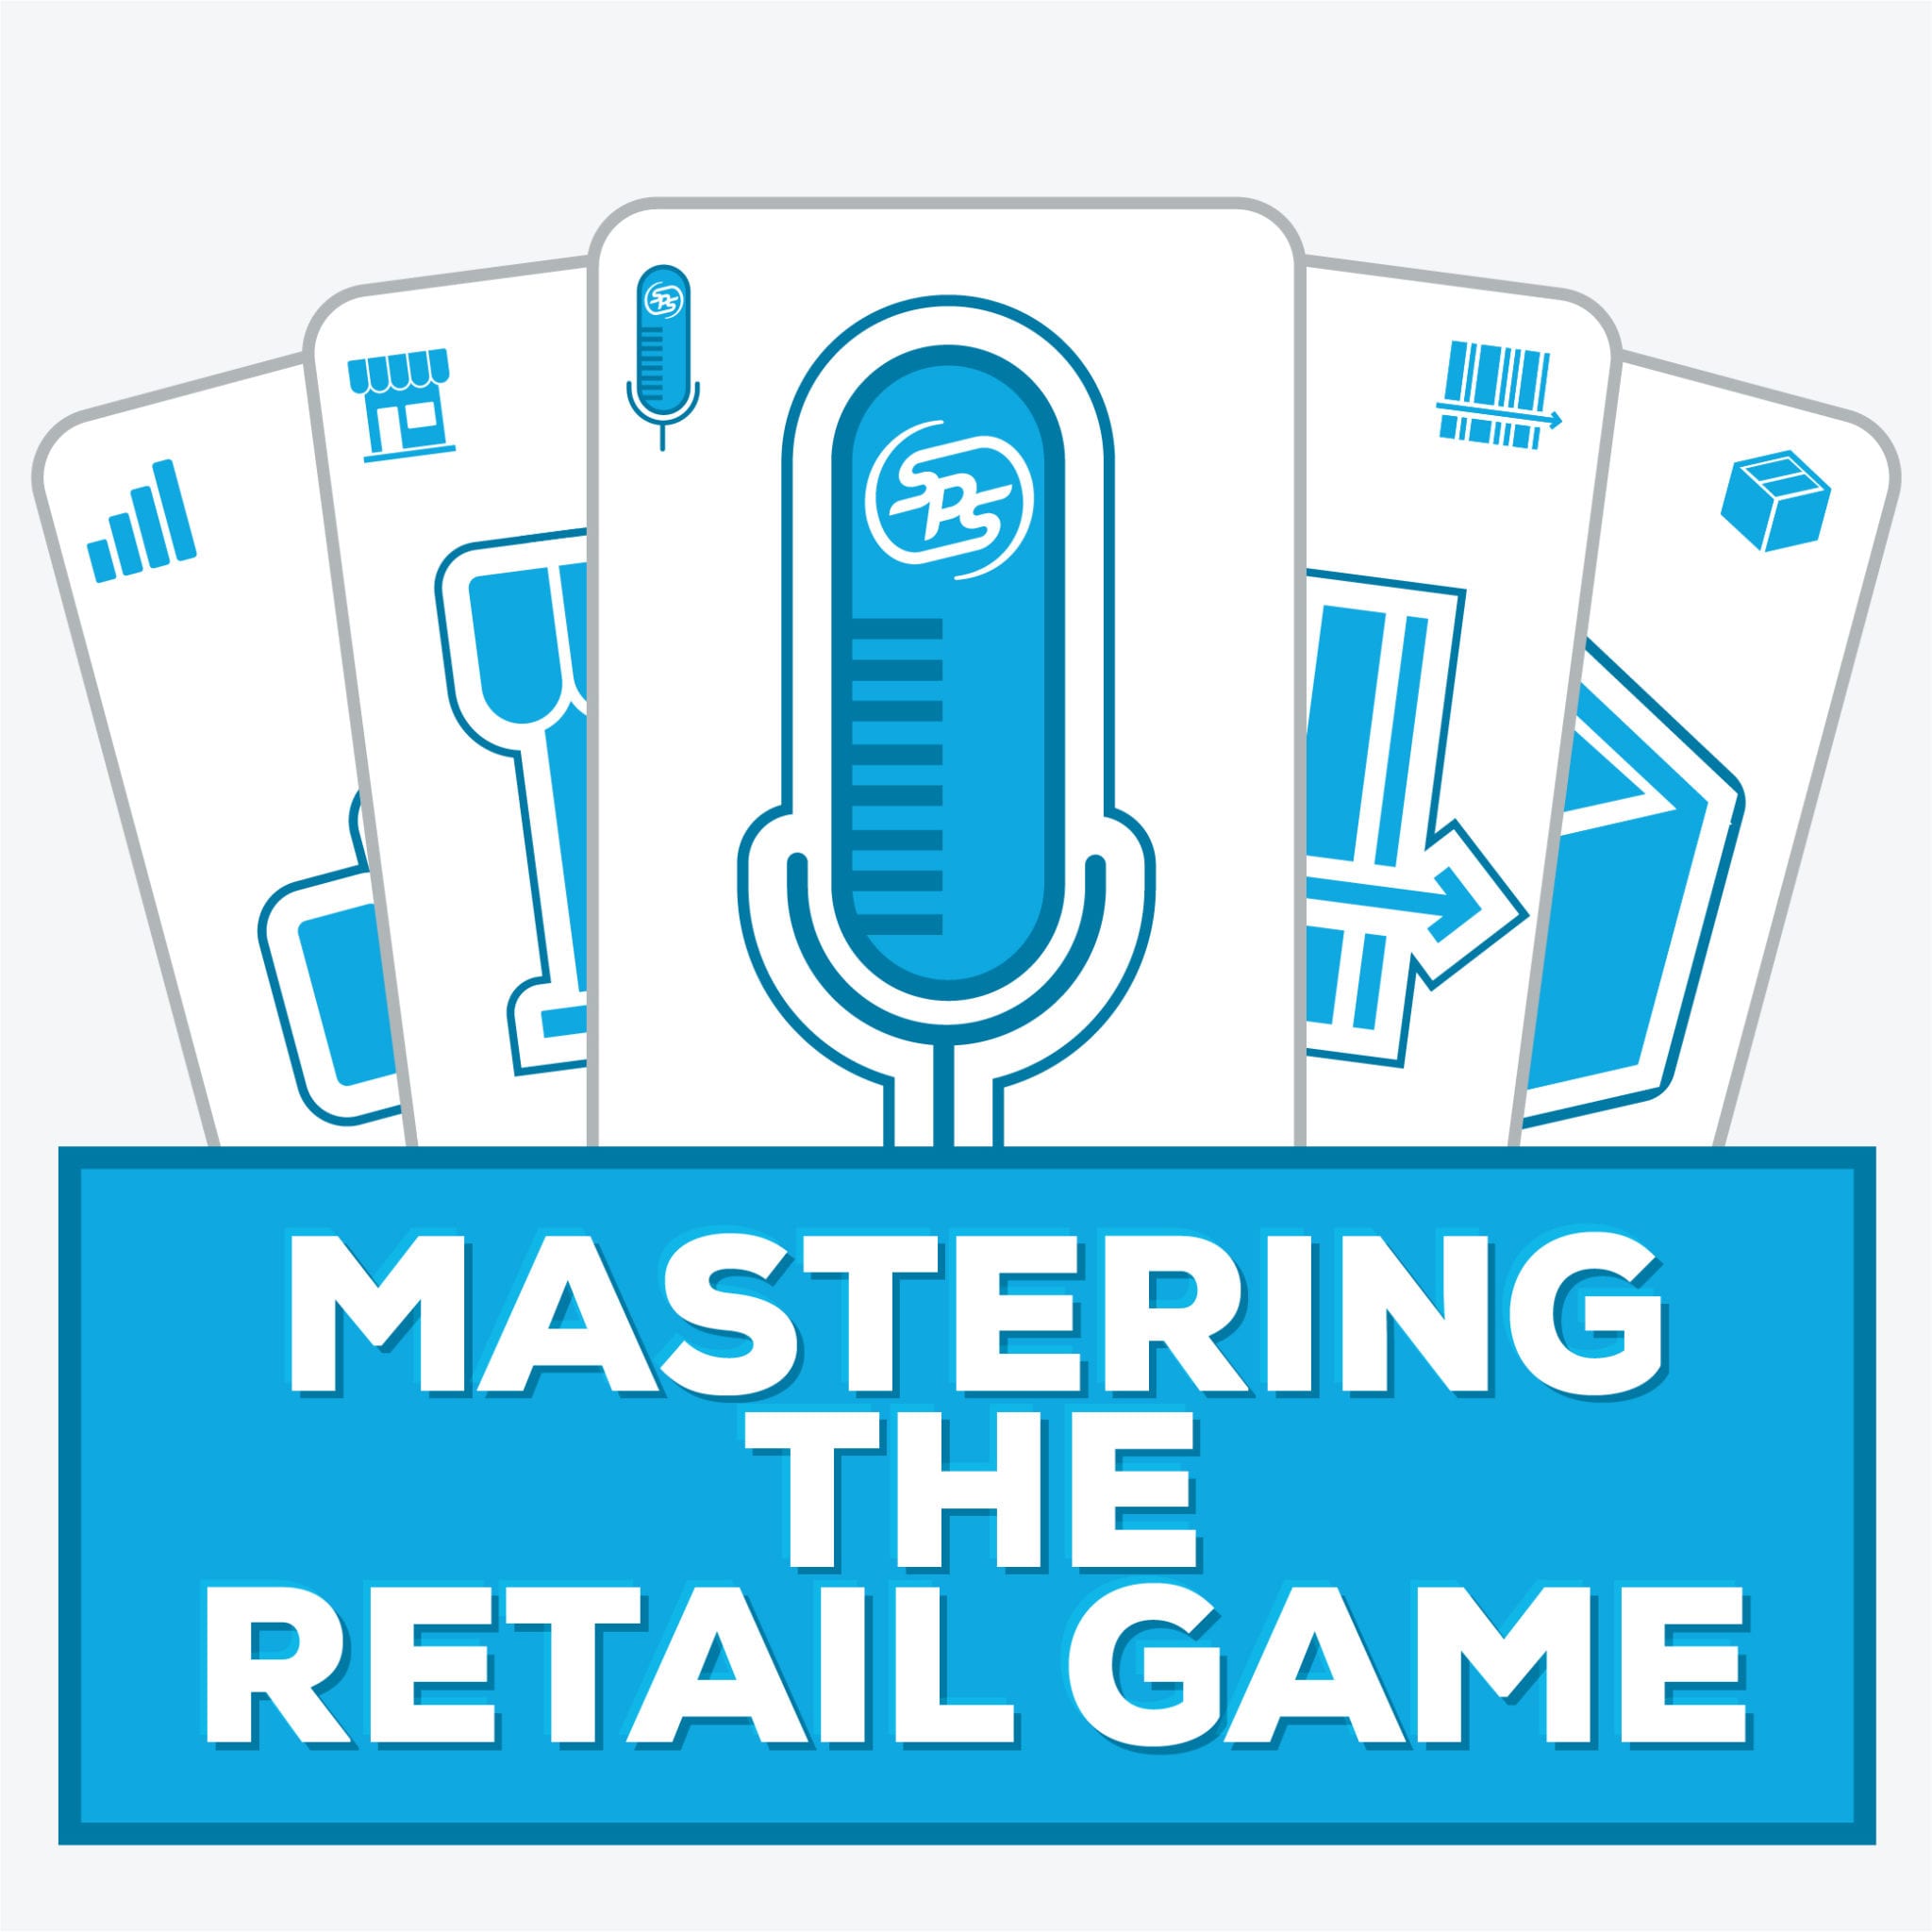 Mastering the Retail Game